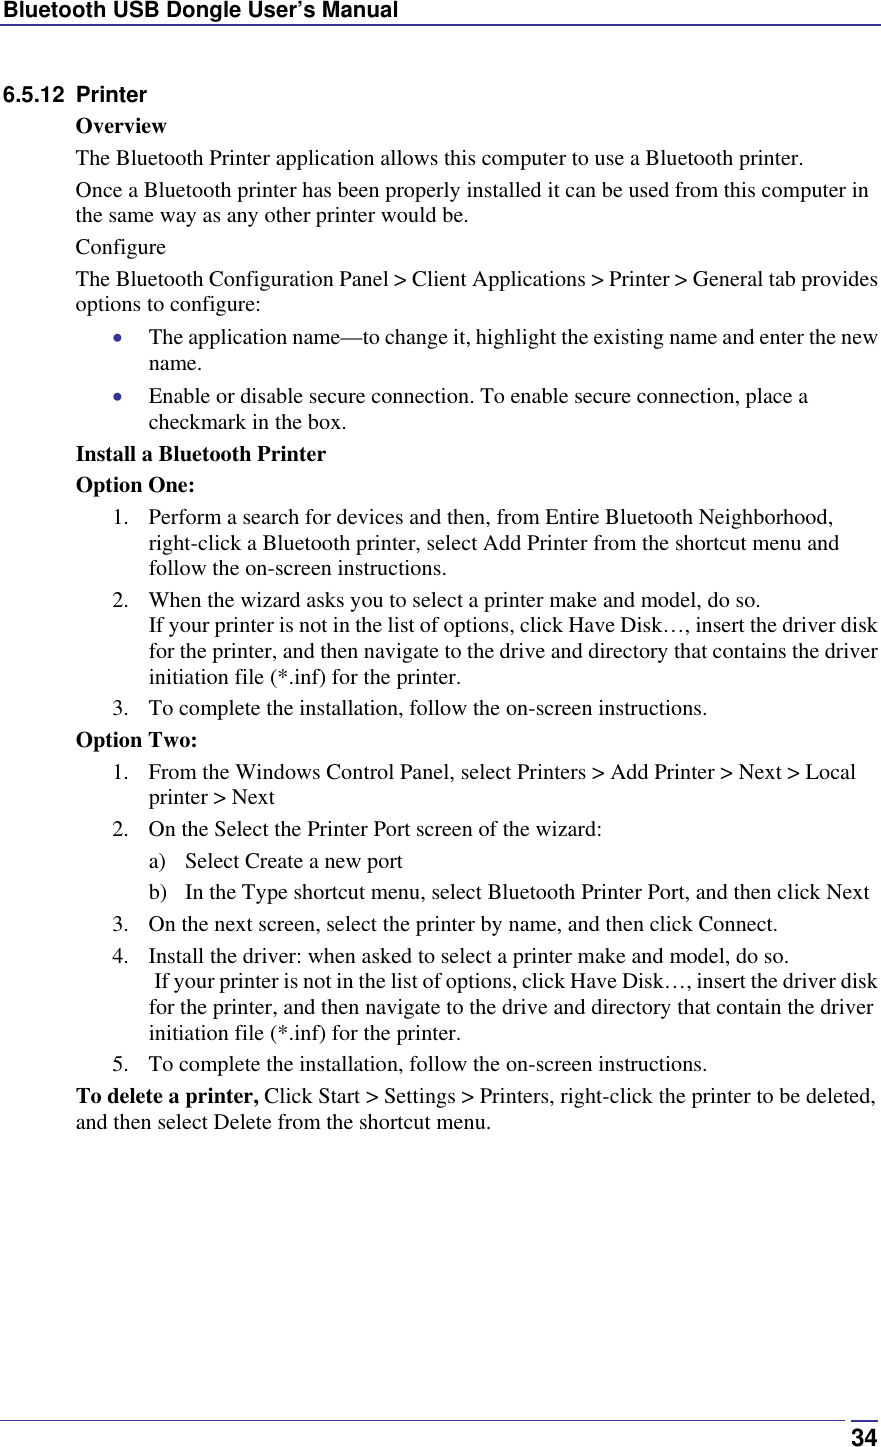 Bluetooth USB Dongle User’s Manual  346.5.12 Printer Overview The Bluetooth Printer application allows this computer to use a Bluetooth printer. Once a Bluetooth printer has been properly installed it can be used from this computer in the same way as any other printer would be. Configure The Bluetooth Configuration Panel &gt; Client Applications &gt; Printer &gt; General tab provides options to configure: •  The application name—to change it, highlight the existing name and enter the new name. •  Enable or disable secure connection. To enable secure connection, place a checkmark in the box. Install a Bluetooth Printer Option One: 1.  Perform a search for devices and then, from Entire Bluetooth Neighborhood, right-click a Bluetooth printer, select Add Printer from the shortcut menu and follow the on-screen instructions.  2.  When the wizard asks you to select a printer make and model, do so.  If your printer is not in the list of options, click Have Disk…, insert the driver disk for the printer, and then navigate to the drive and directory that contains the driver initiation file (*.inf) for the printer. 3.  To complete the installation, follow the on-screen instructions. Option Two: 1.  From the Windows Control Panel, select Printers &gt; Add Printer &gt; Next &gt; Local printer &gt; Next 2.  On the Select the Printer Port screen of the wizard: a)  Select Create a new port b)  In the Type shortcut menu, select Bluetooth Printer Port, and then click Next 3.  On the next screen, select the printer by name, and then click Connect.  4.  Install the driver: when asked to select a printer make and model, do so.  If your printer is not in the list of options, click Have Disk…, insert the driver disk for the printer, and then navigate to the drive and directory that contain the driver initiation file (*.inf) for the printer. 5.  To complete the installation, follow the on-screen instructions. To delete a printer, Click Start &gt; Settings &gt; Printers, right-click the printer to be deleted, and then select Delete from the shortcut menu. 